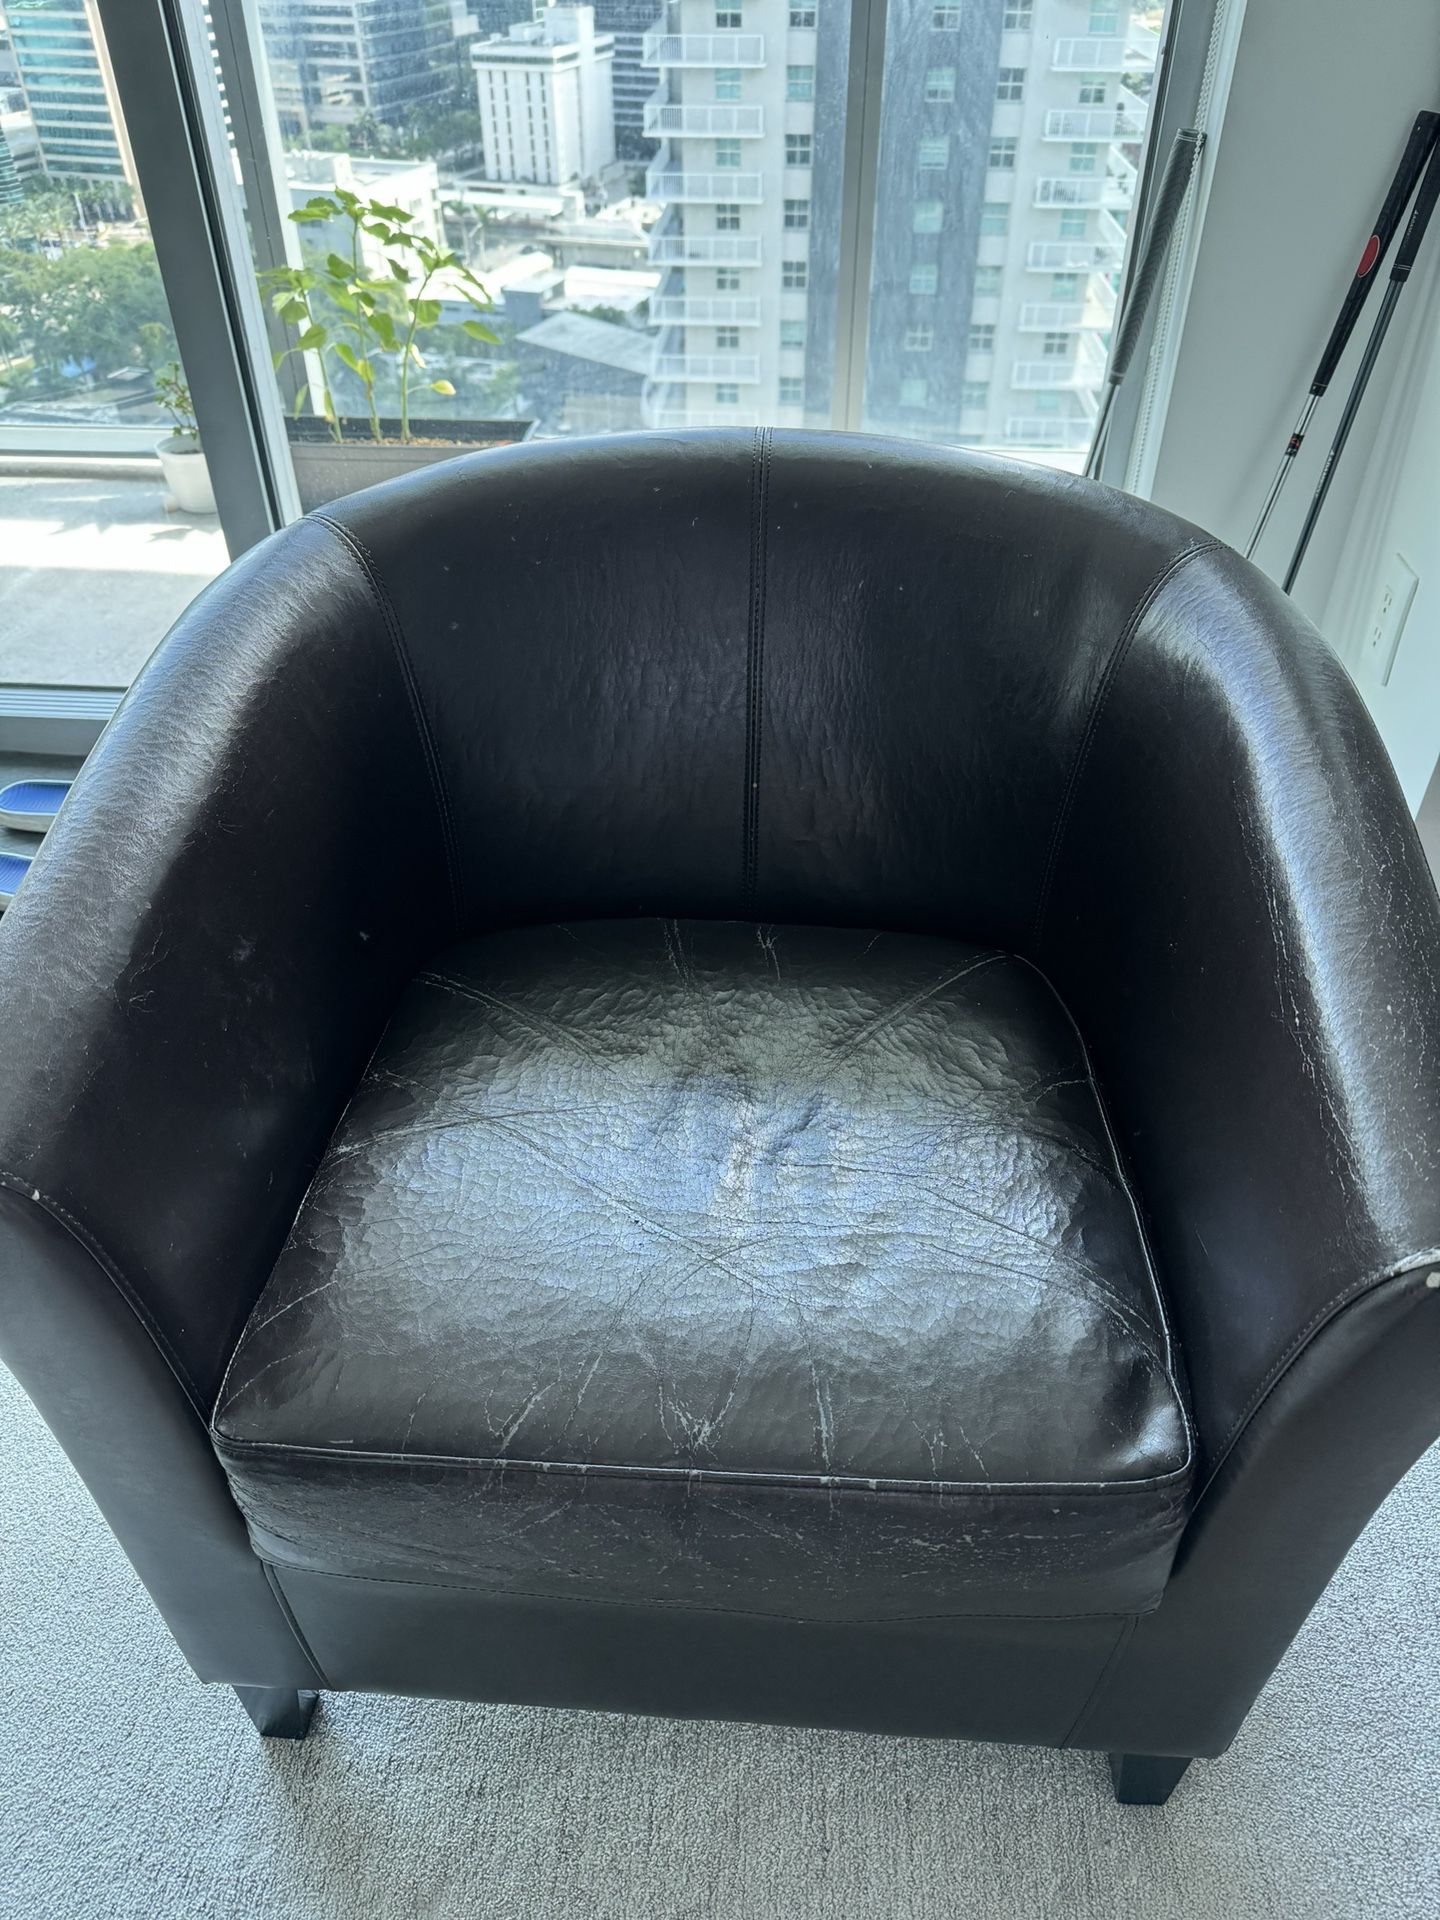 Leather Couch Chair 